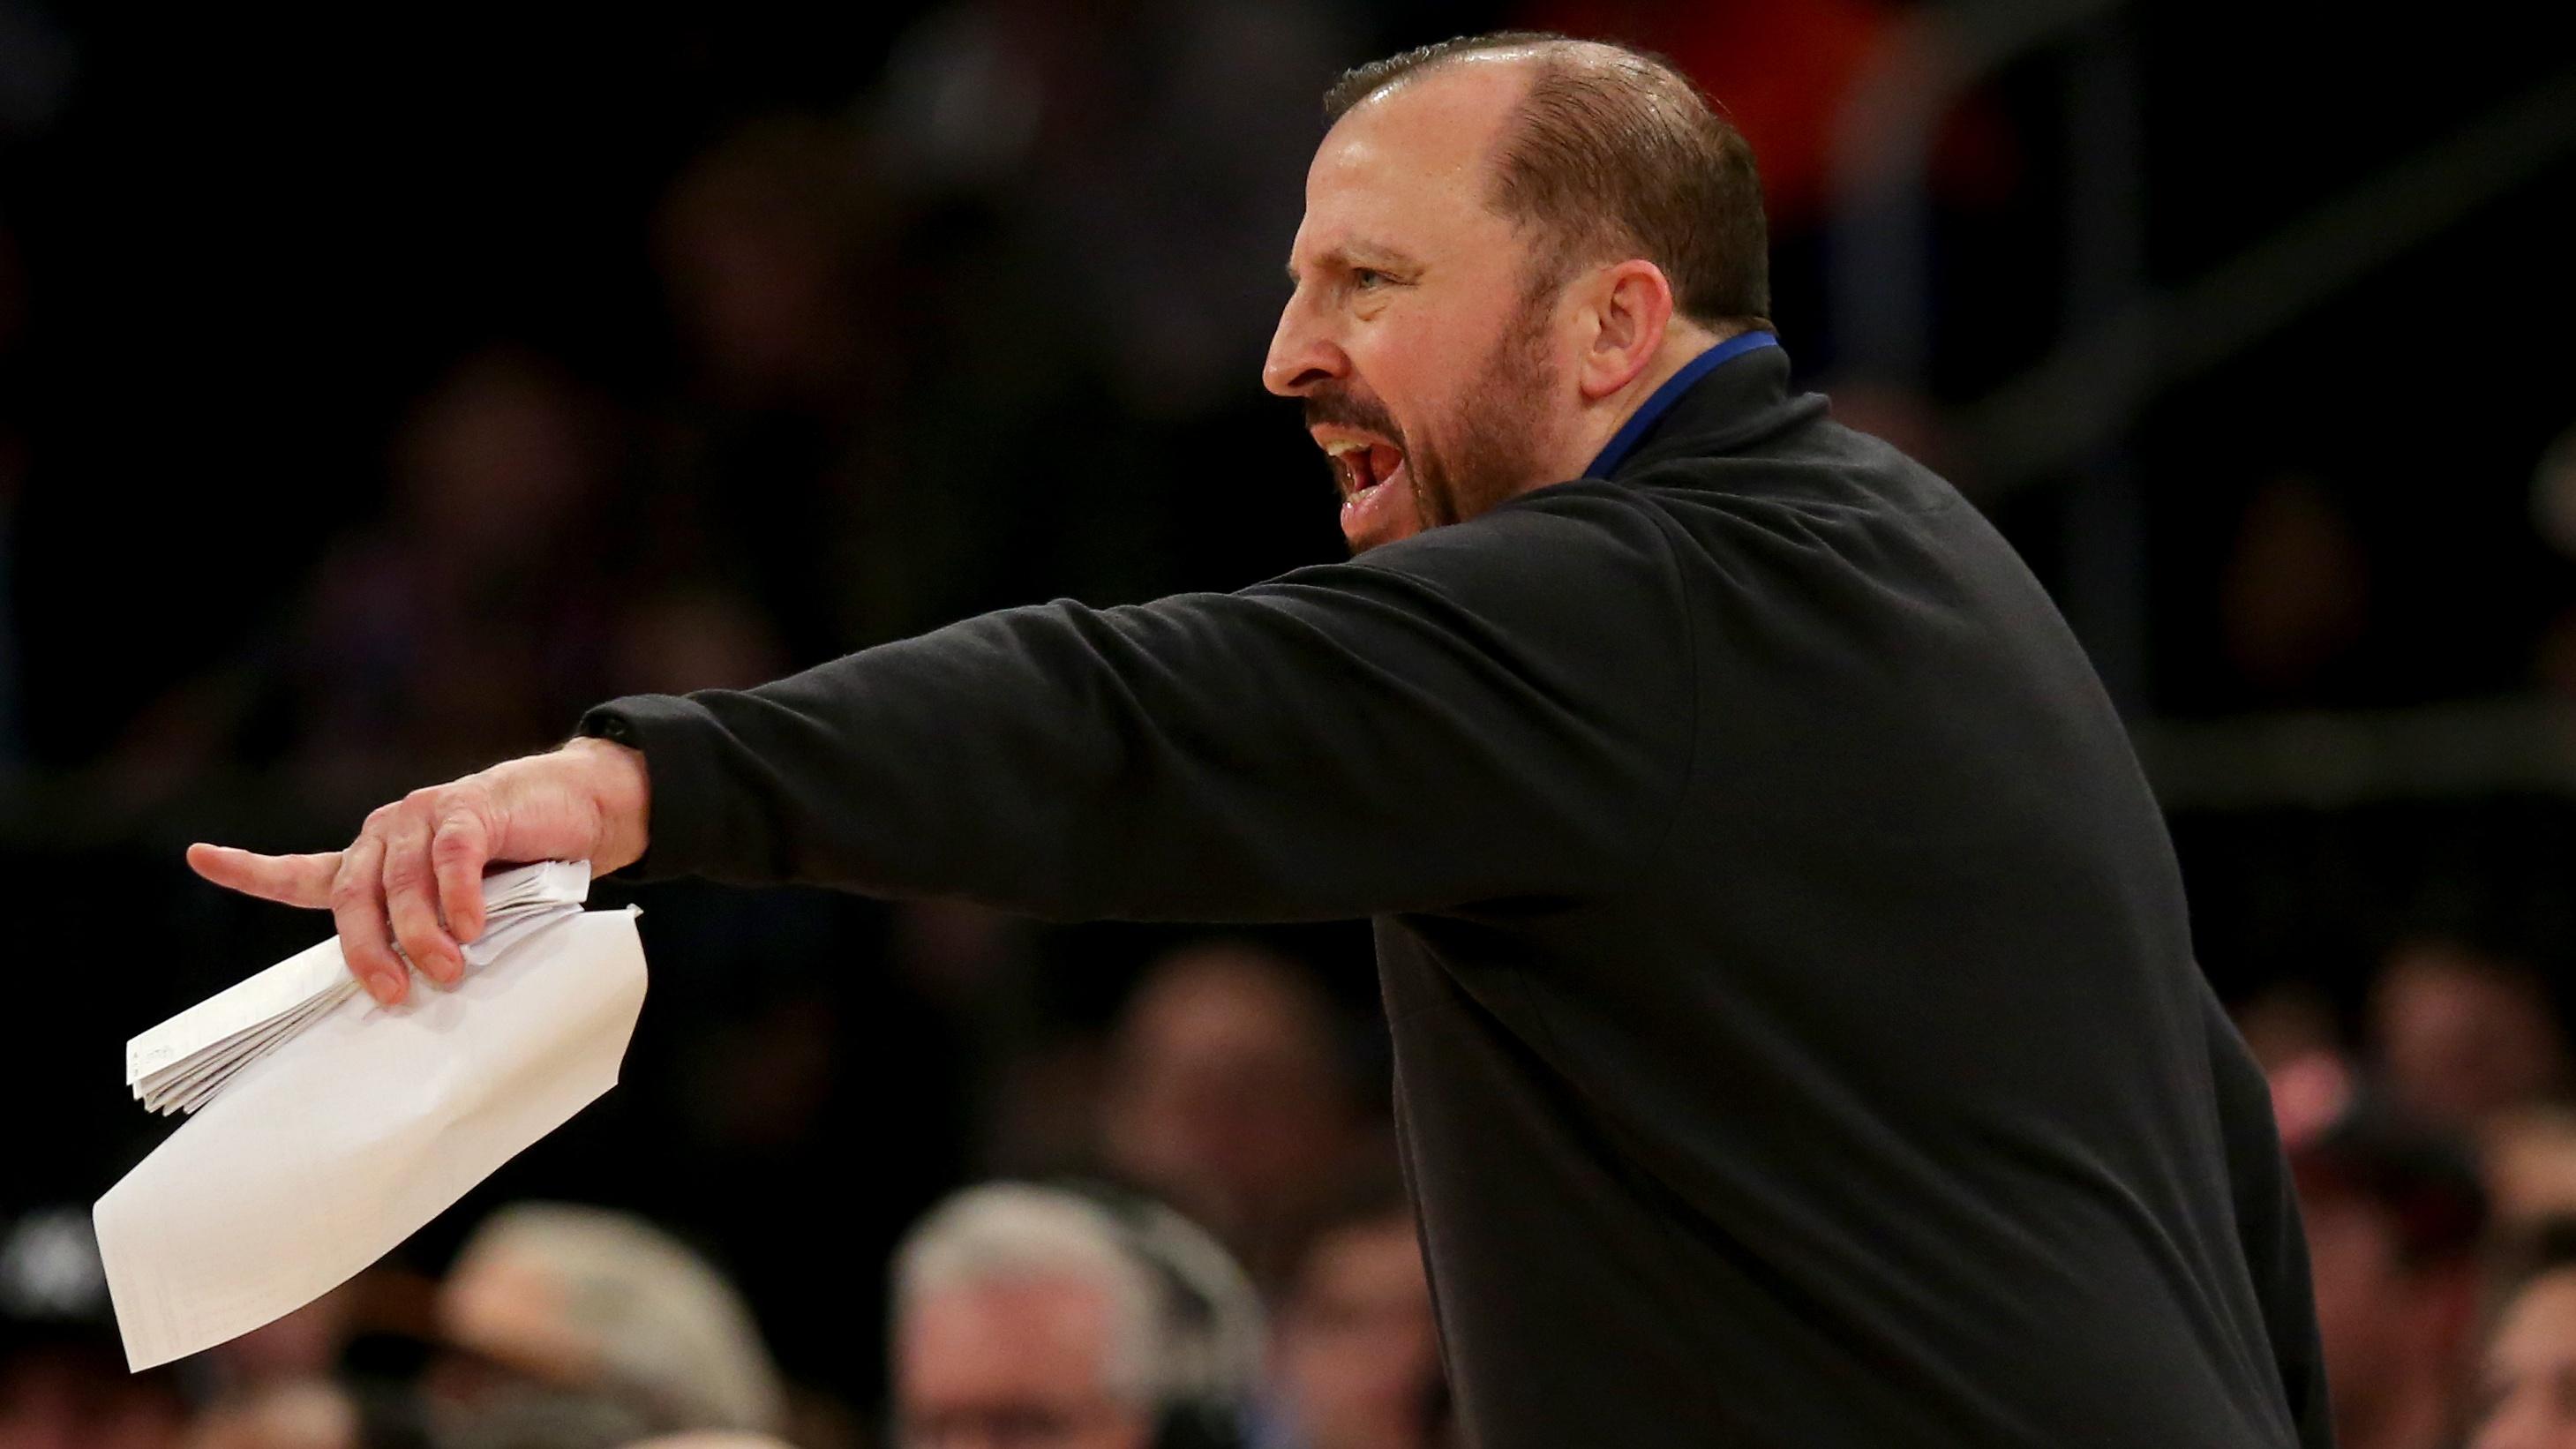 New York, New York, USA; New York Knicks head coach Tom Thibodeau coaches against the Atlanta Hawks during the second quarter at Madison Square Garden. / Brad Penner - USA TODAY Sports